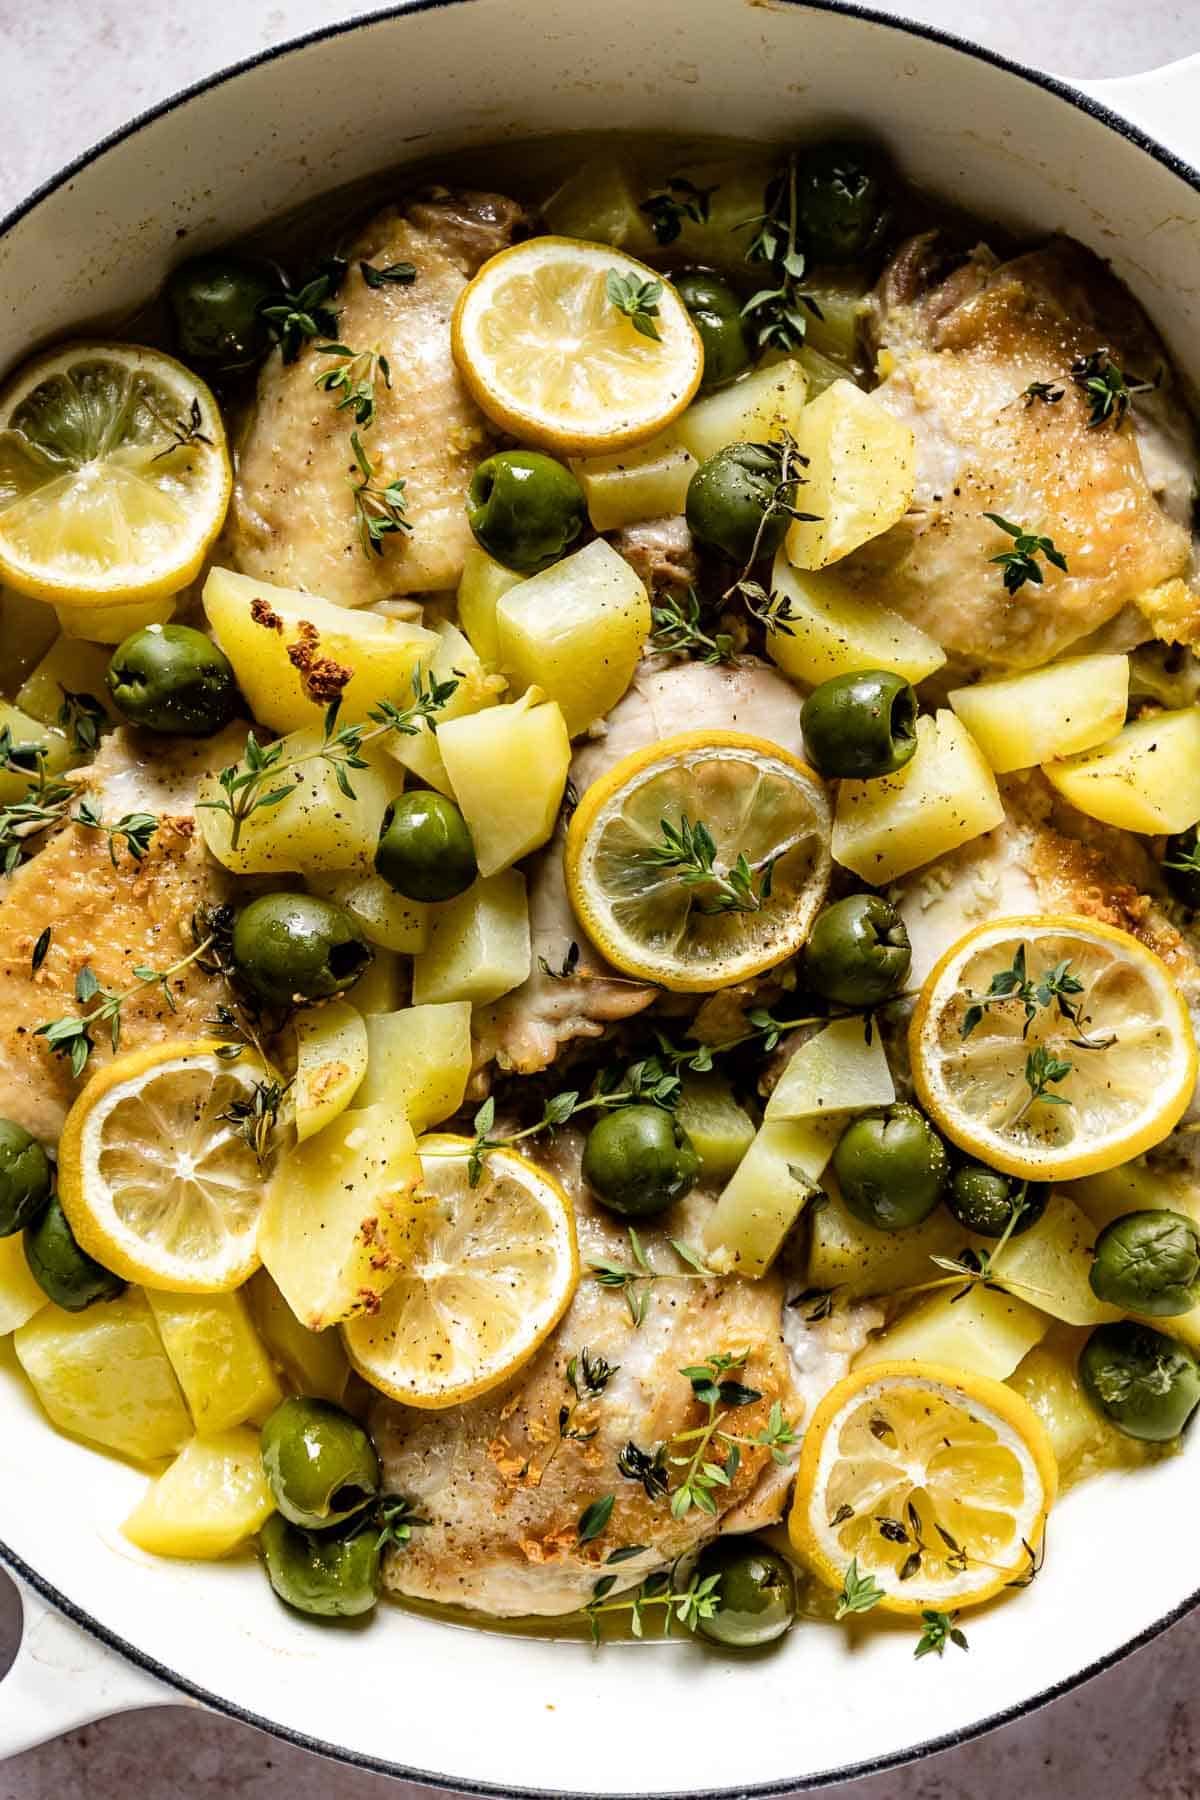 Baked Mediterranean chicken with lemon is in a skillet from the top view.